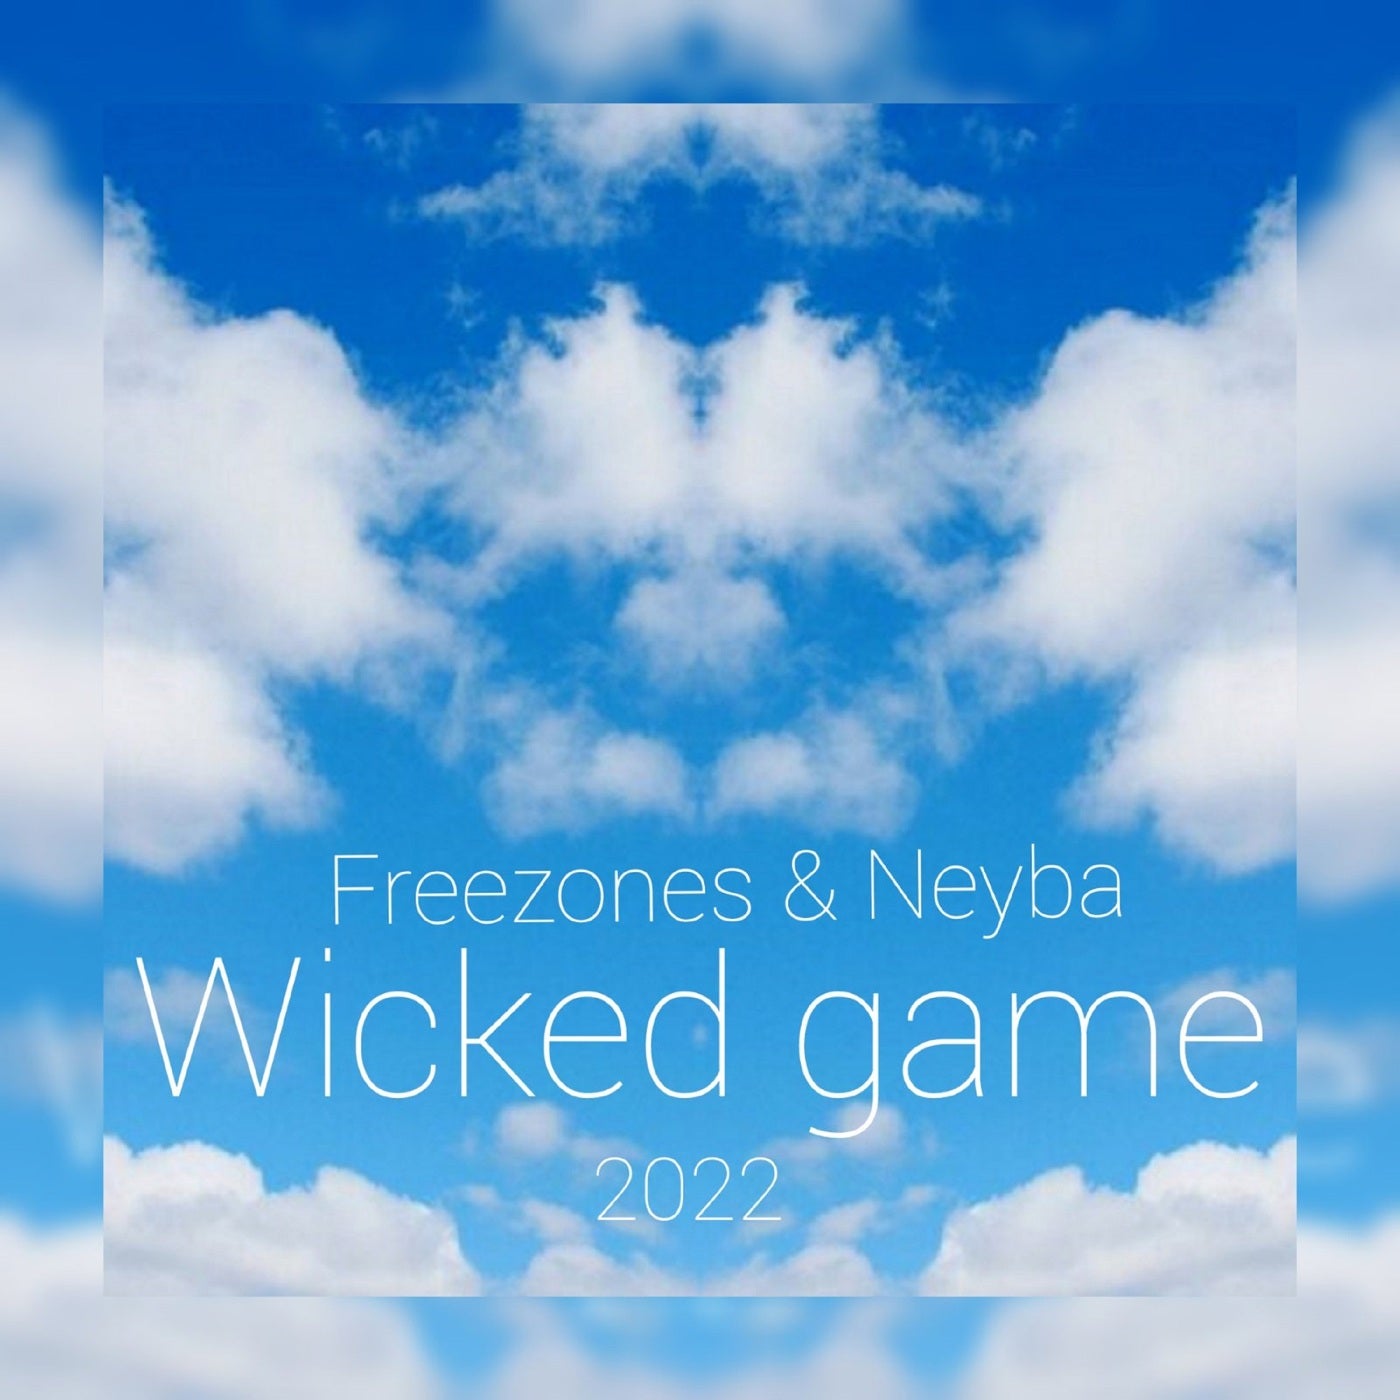 Wicked game 2022